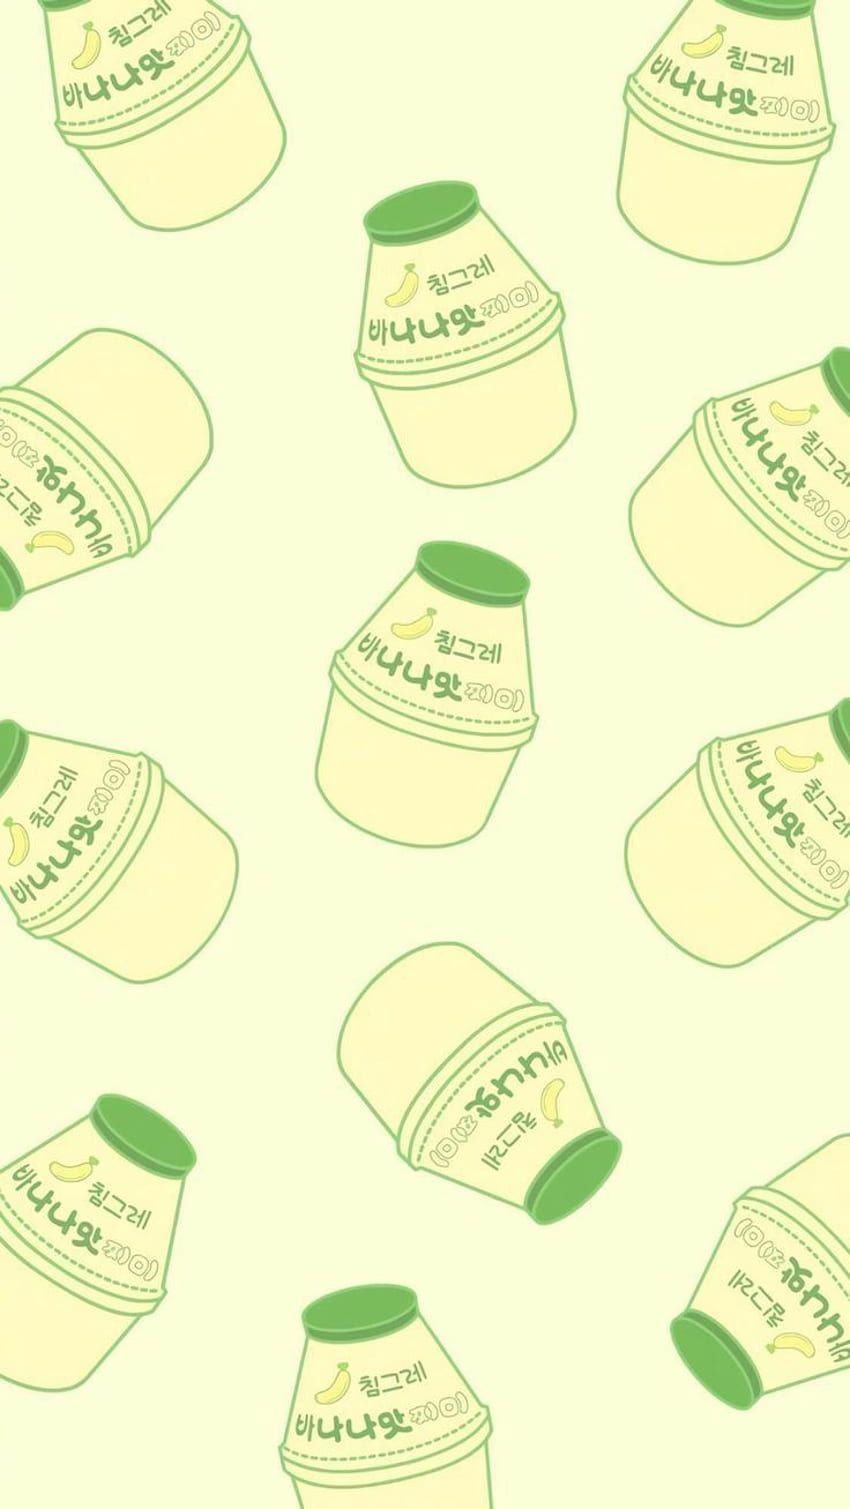 A pattern of green and white yogurt containers - Milk